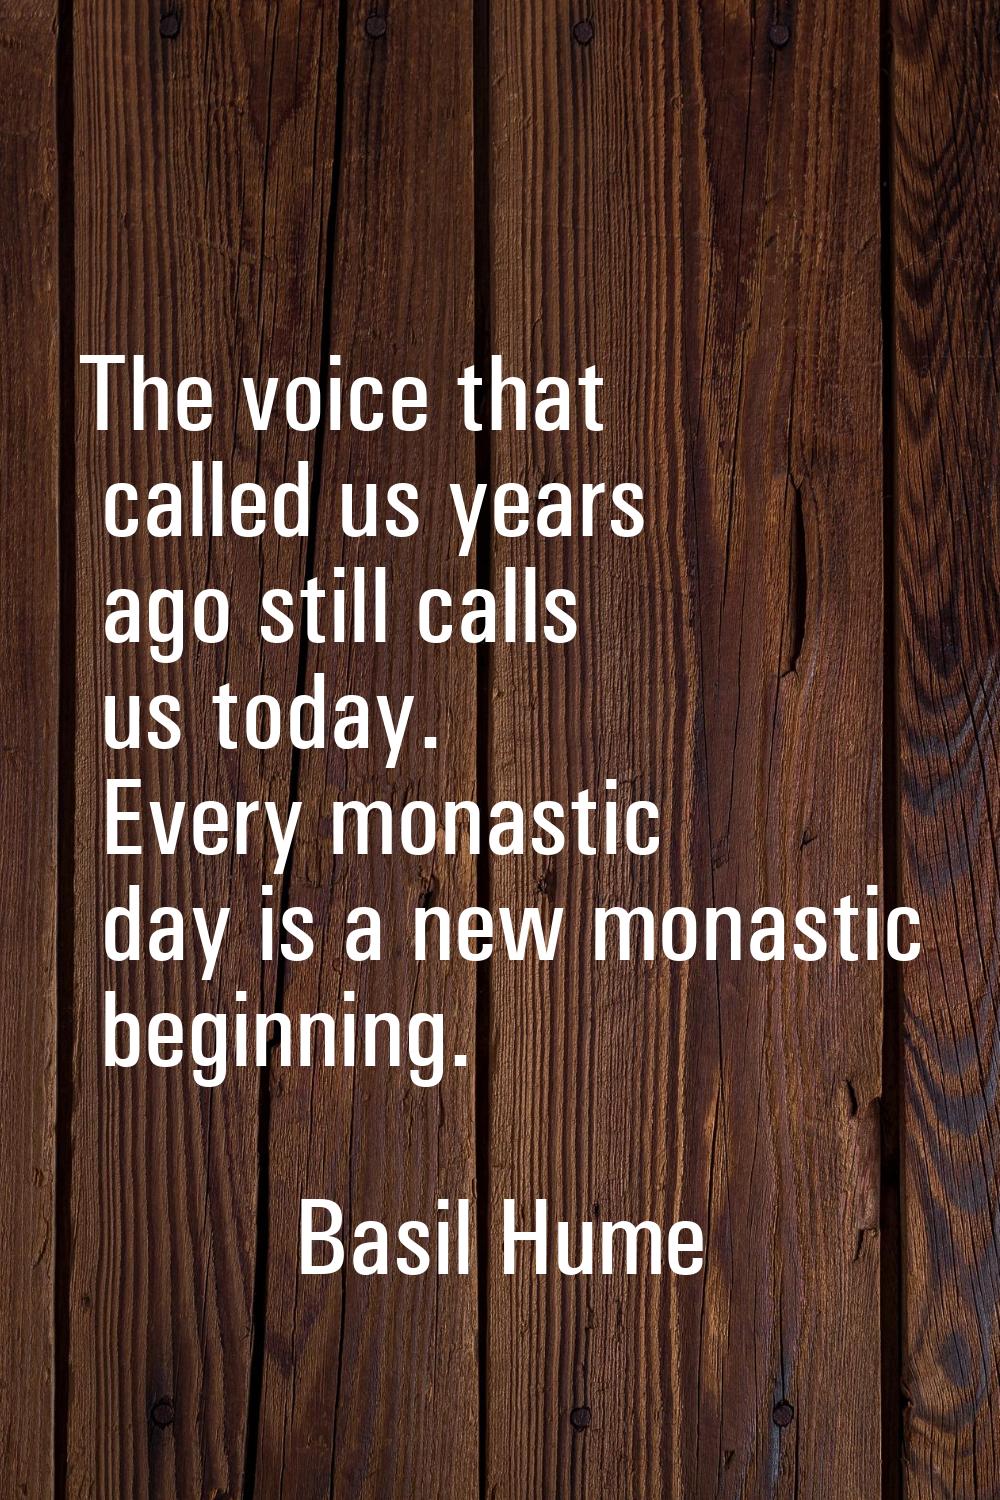 The voice that called us years ago still calls us today. Every monastic day is a new monastic begin